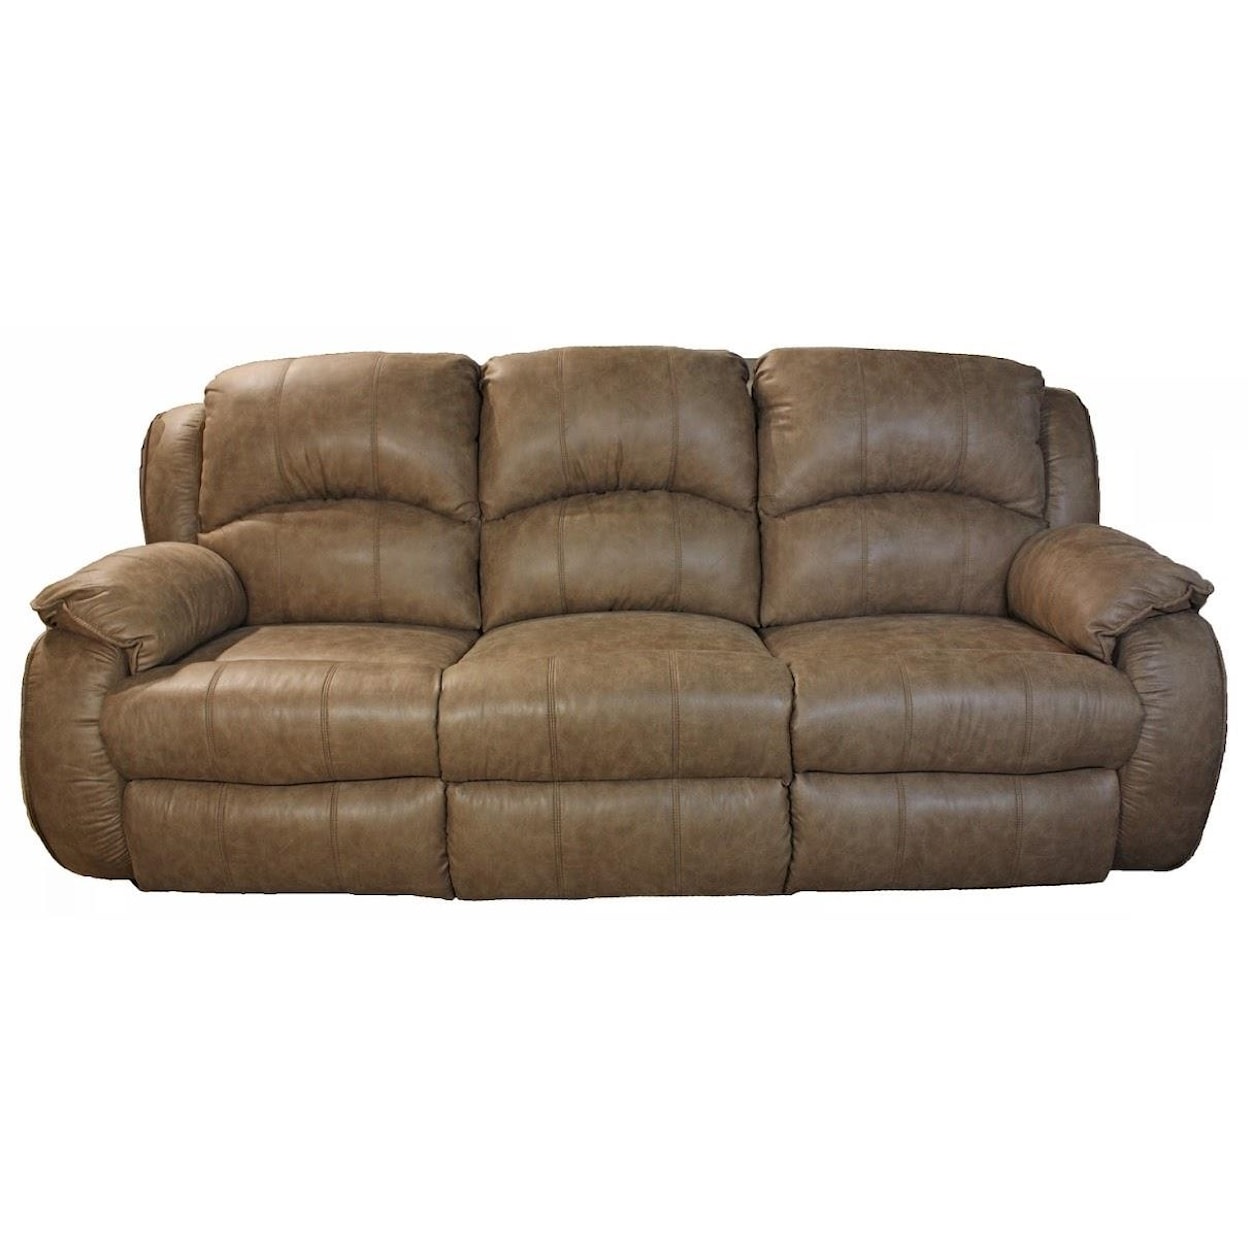 Southern Motion CAGNEY Double Reclining Sofa